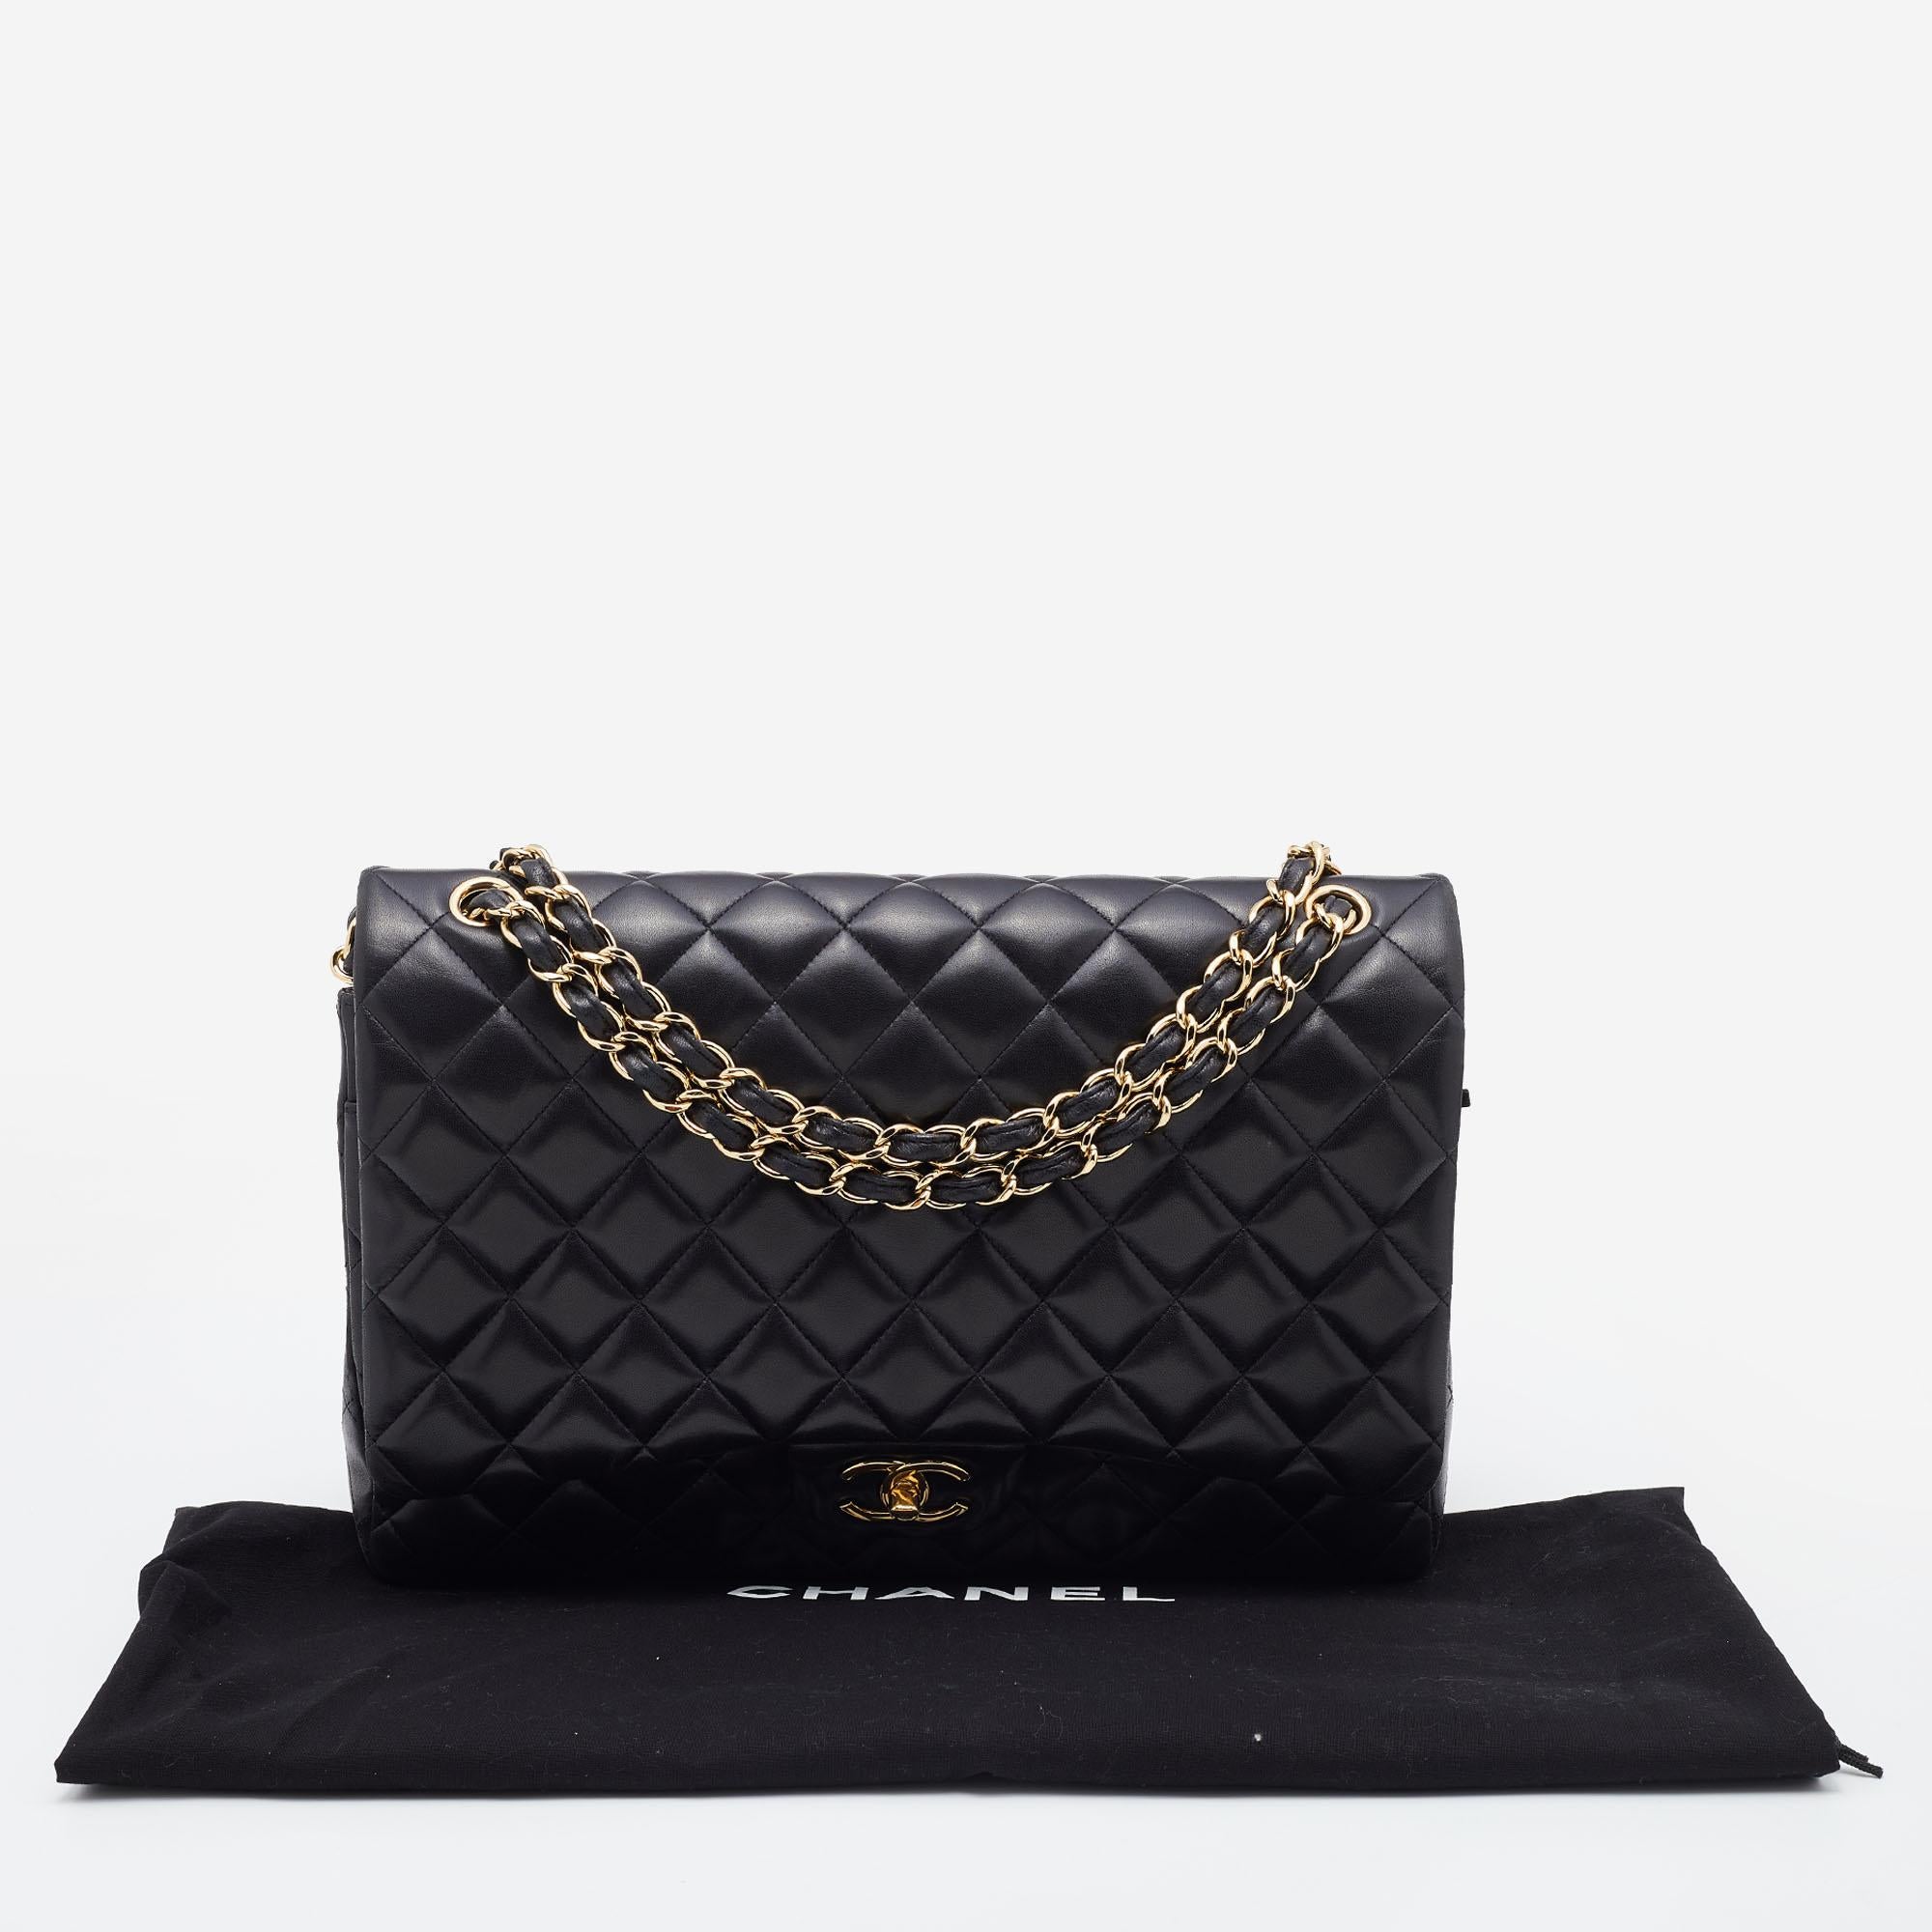 Chanel Black Quilted Leather Maxi Classic Double Flap Bag 12